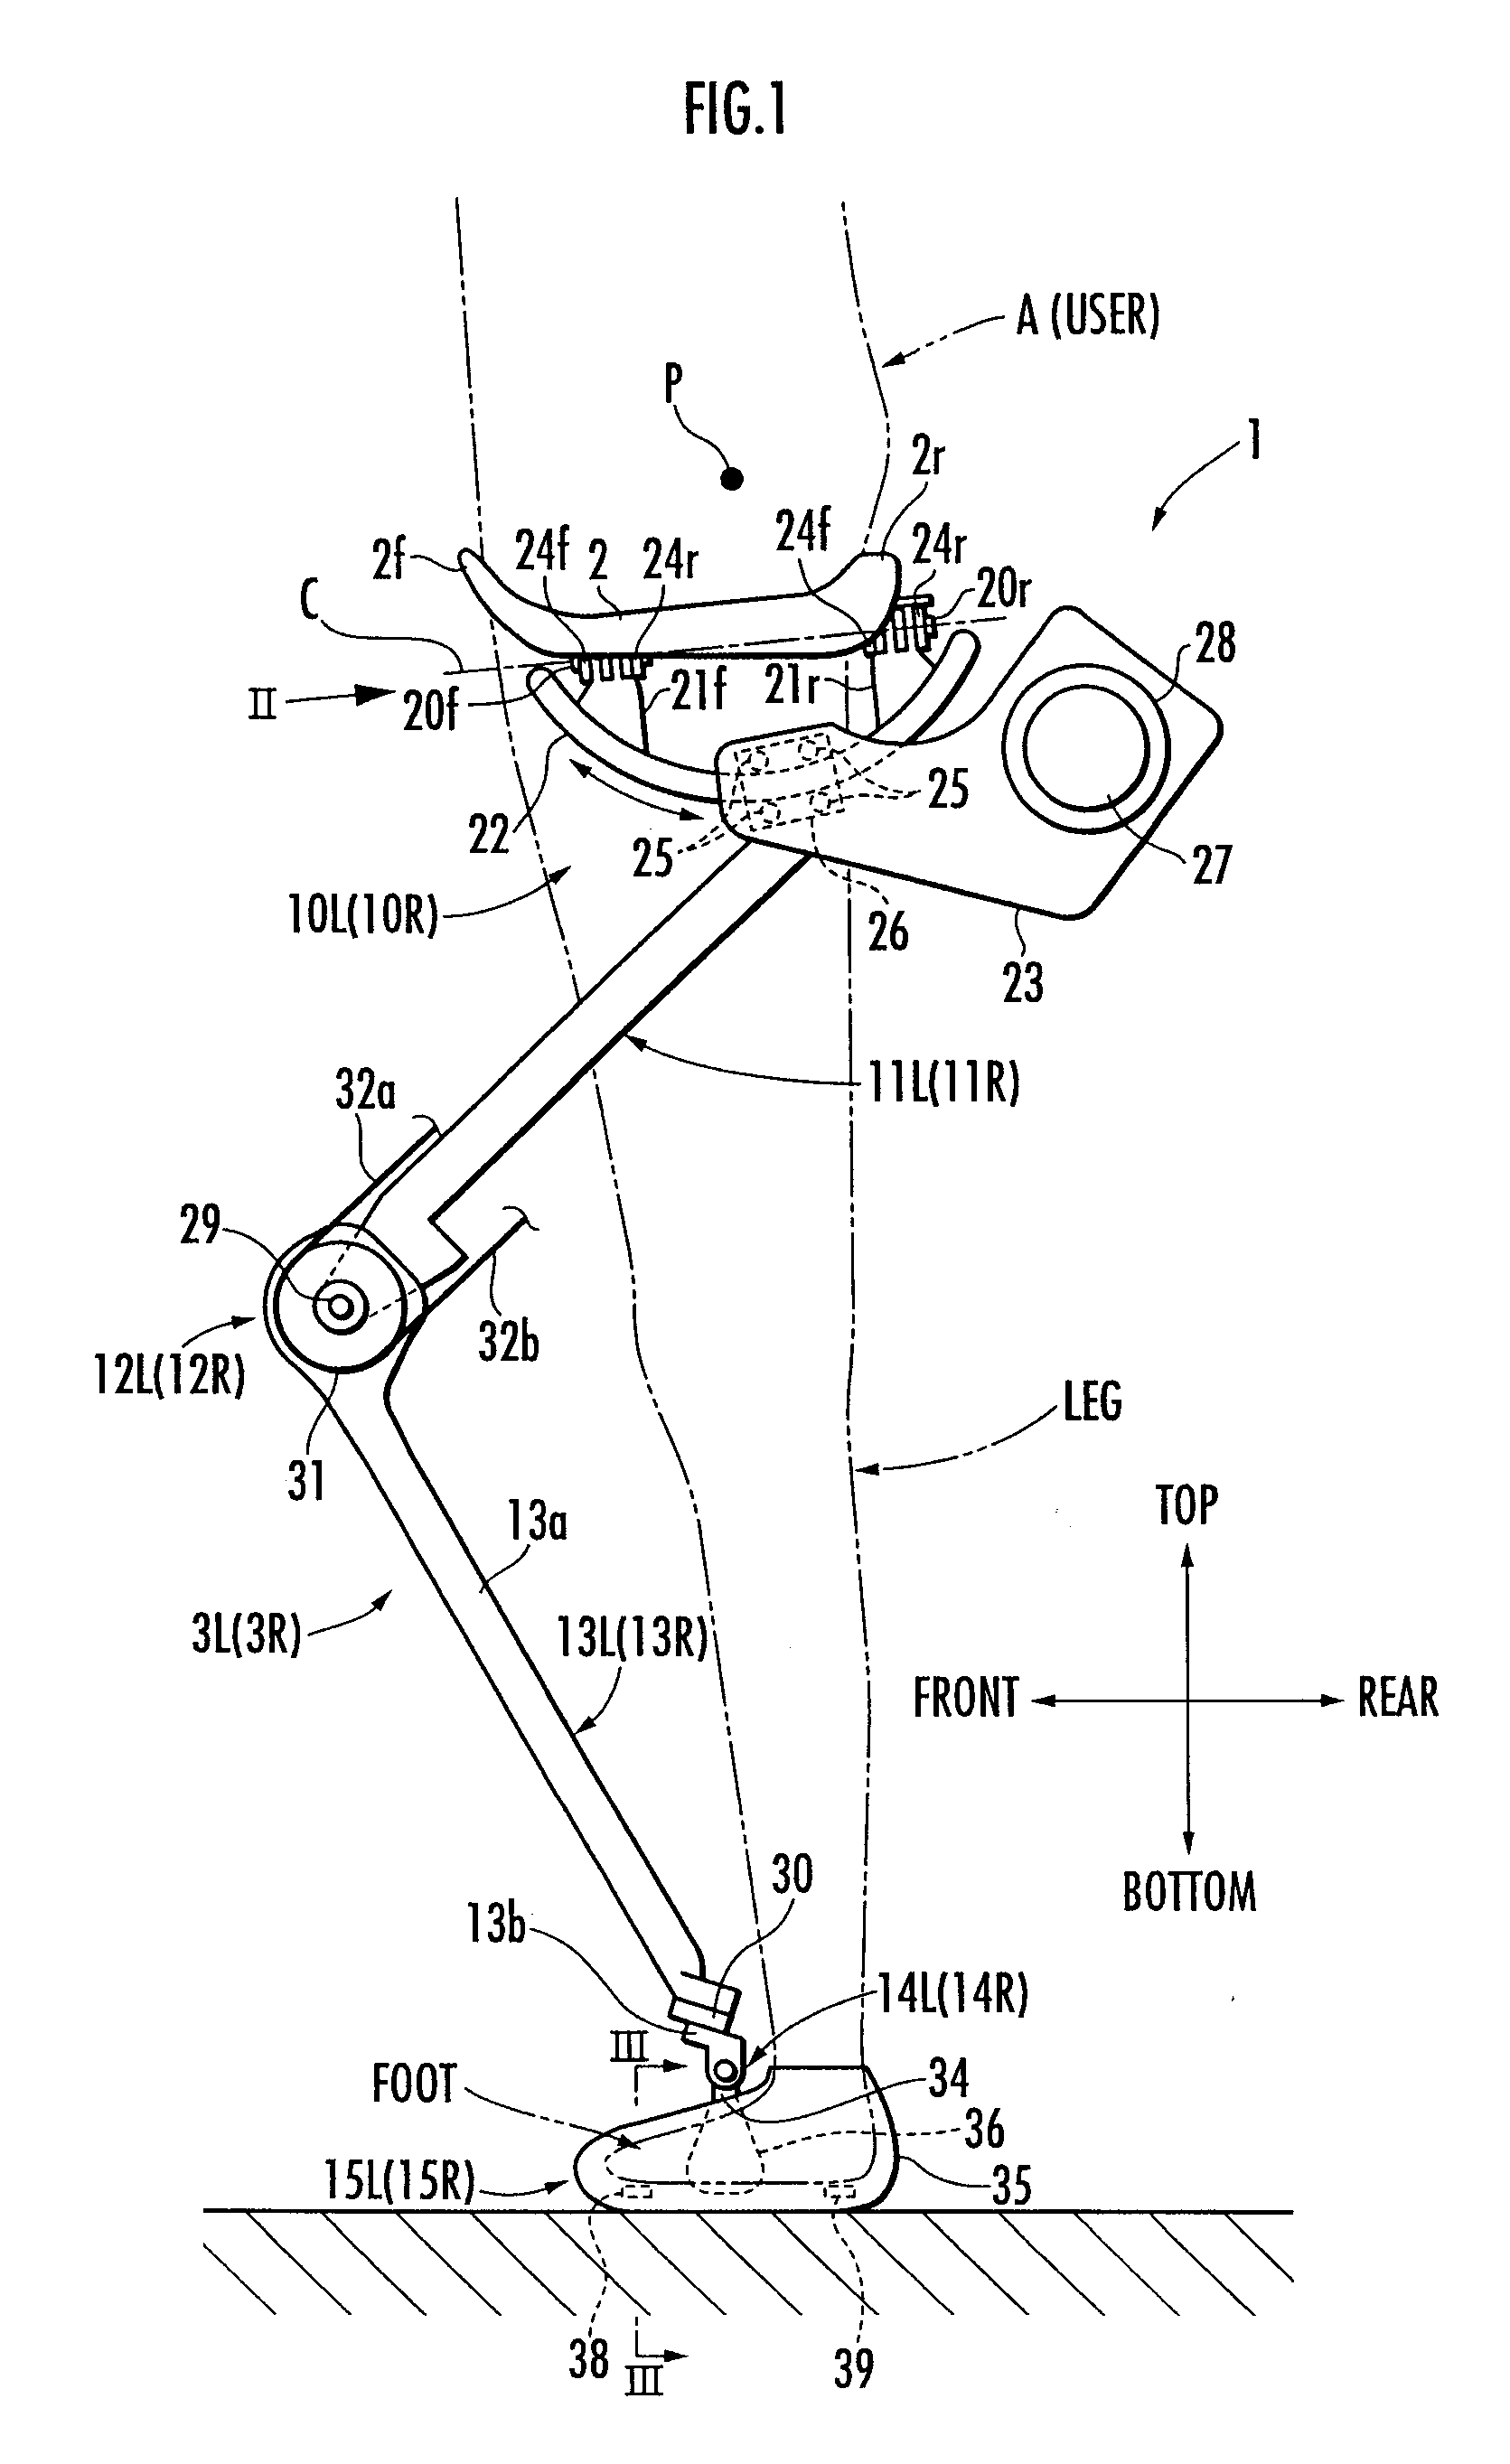 Control device and control program for walking assist apparatus